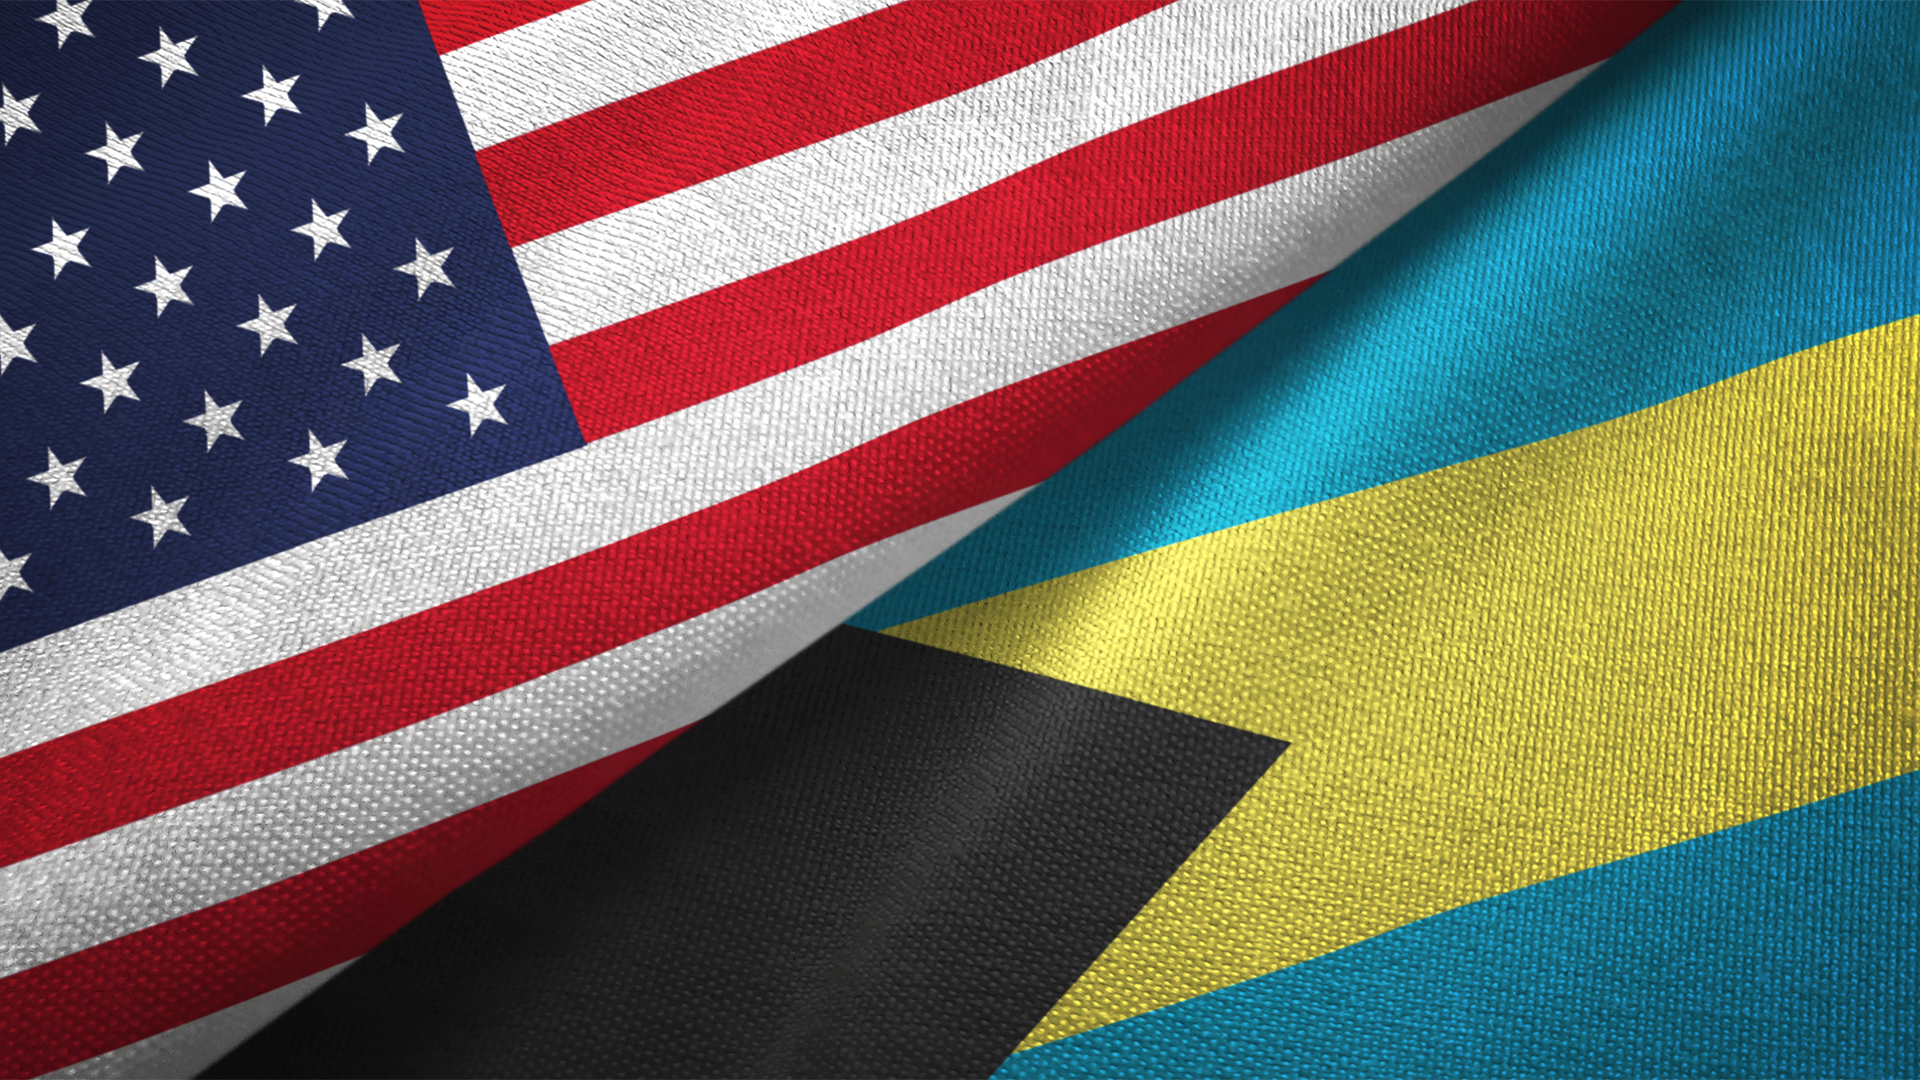 United States and Bahamas two flags textile cloth, fabric texture Image